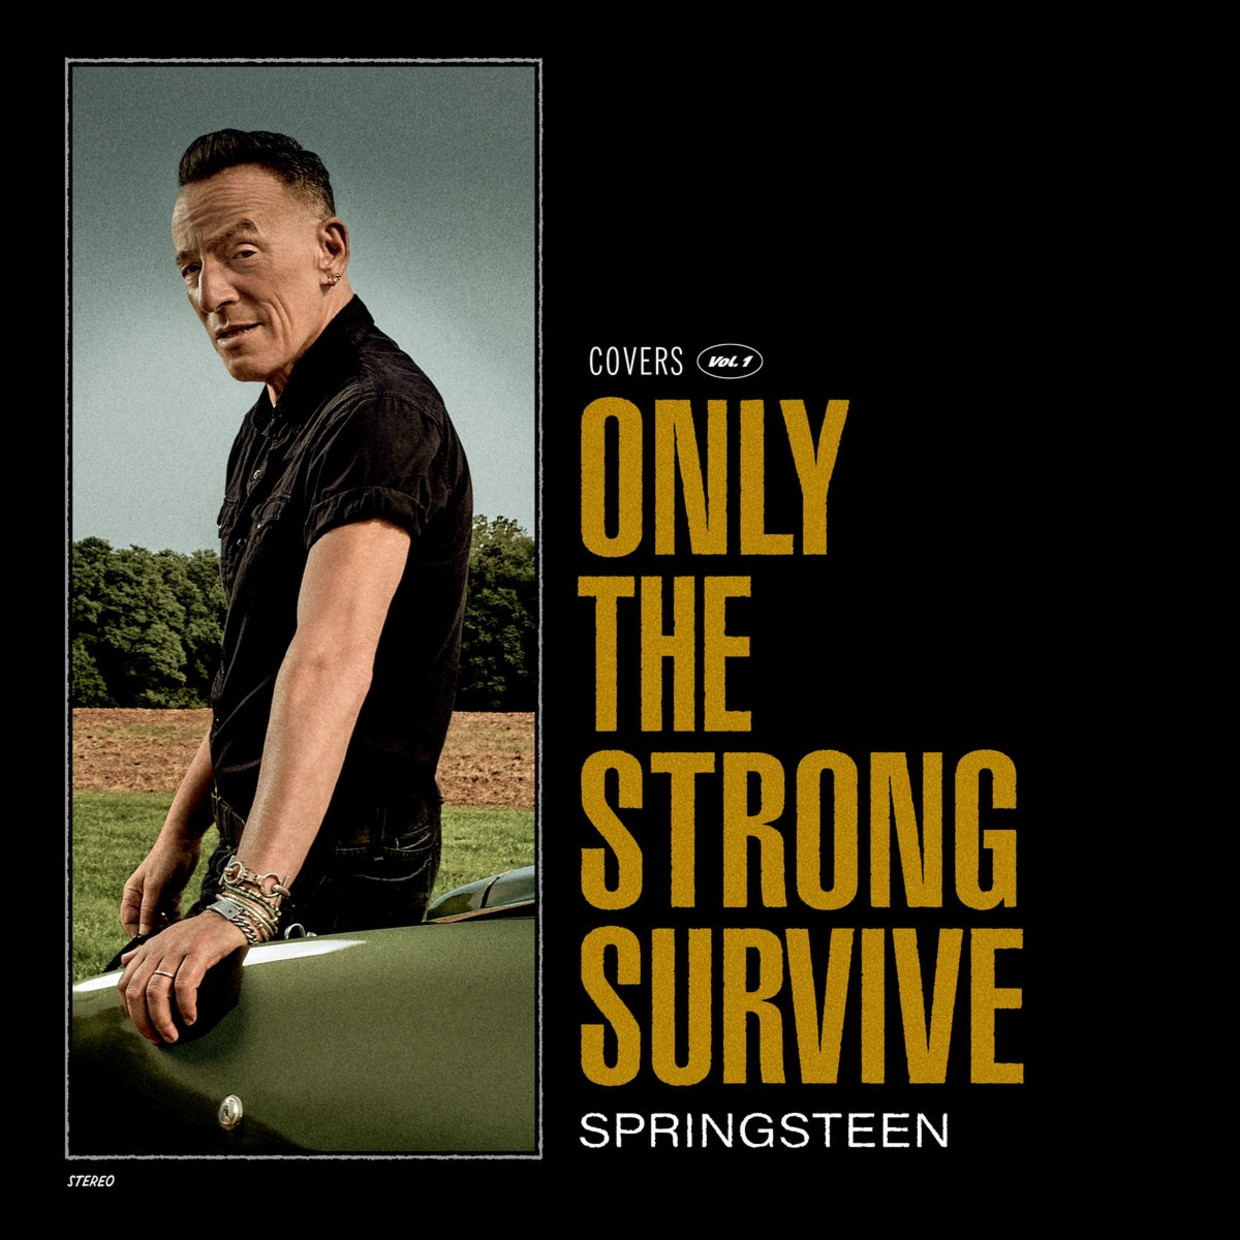 Bruce Springsteen - Only The Strong Survive Beeld RV